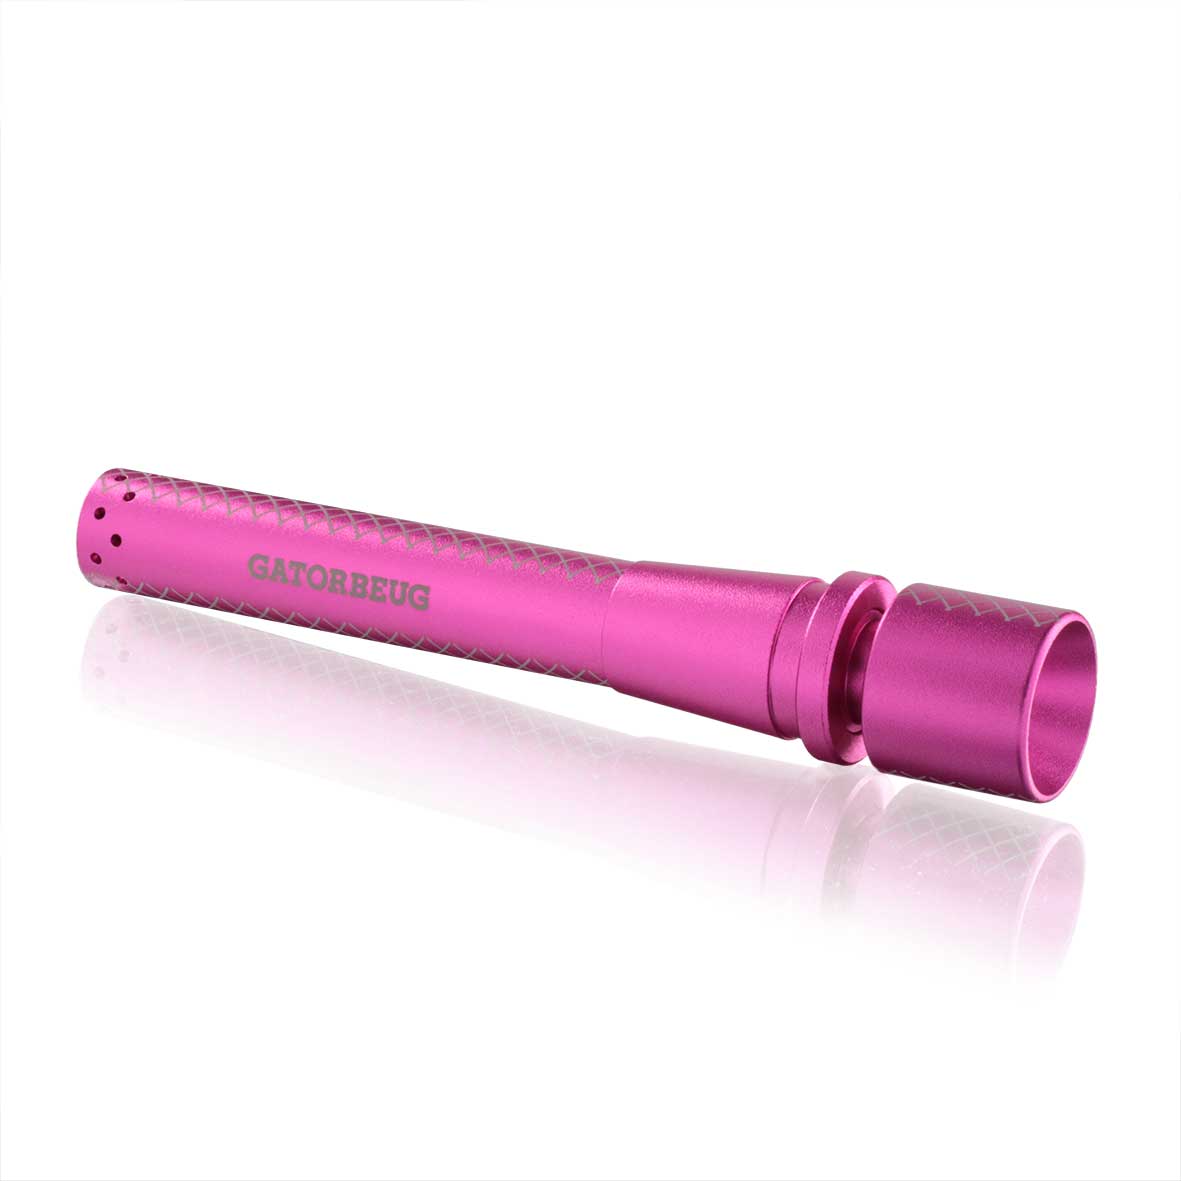 UNBREAKABLE STEM AND BOWL KIT PINK